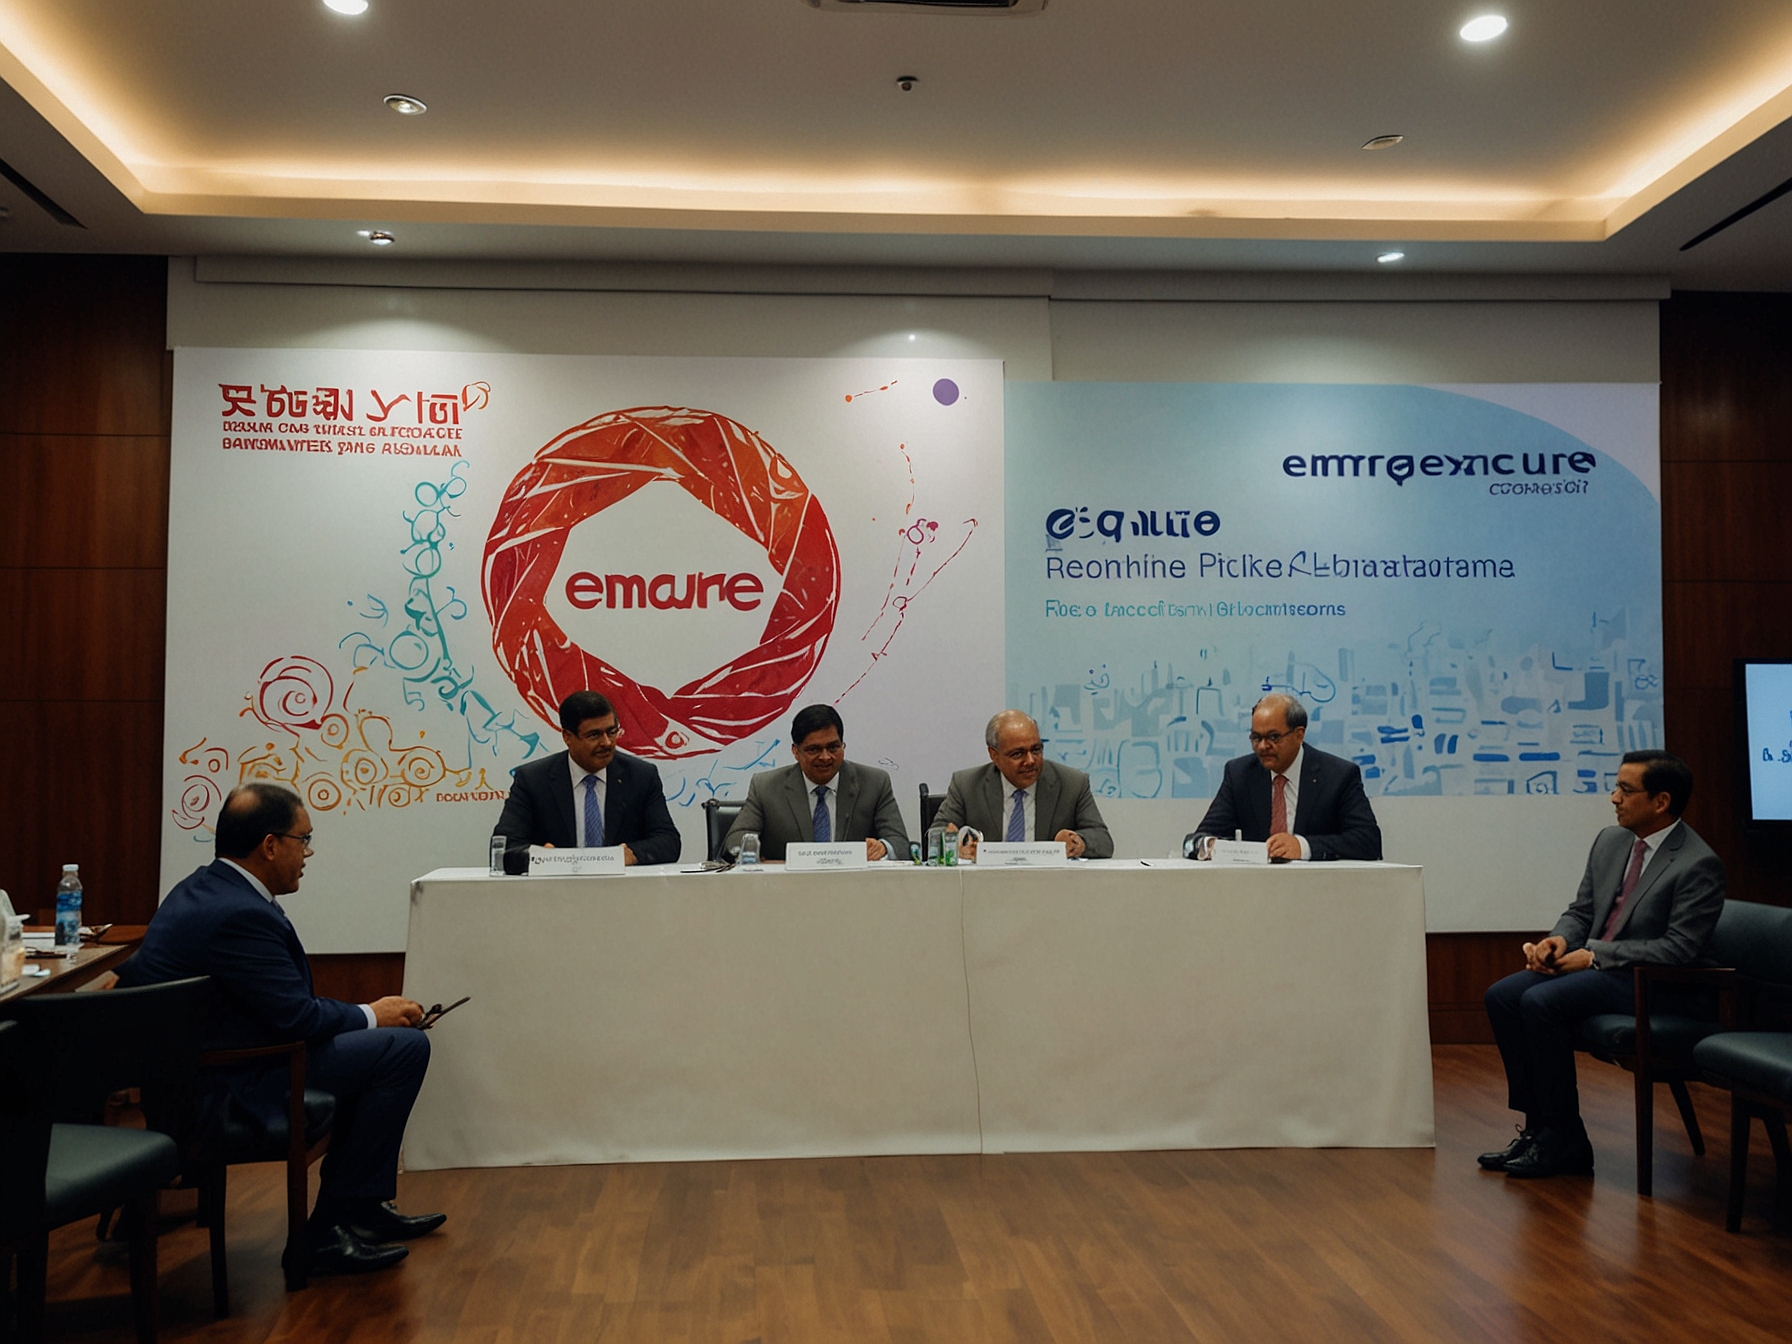 Emcure Pharmaceuticals logo prominently displayed at a press conference announcing the success of their IPO pre-raise of ₹582 crore from anchor investors.